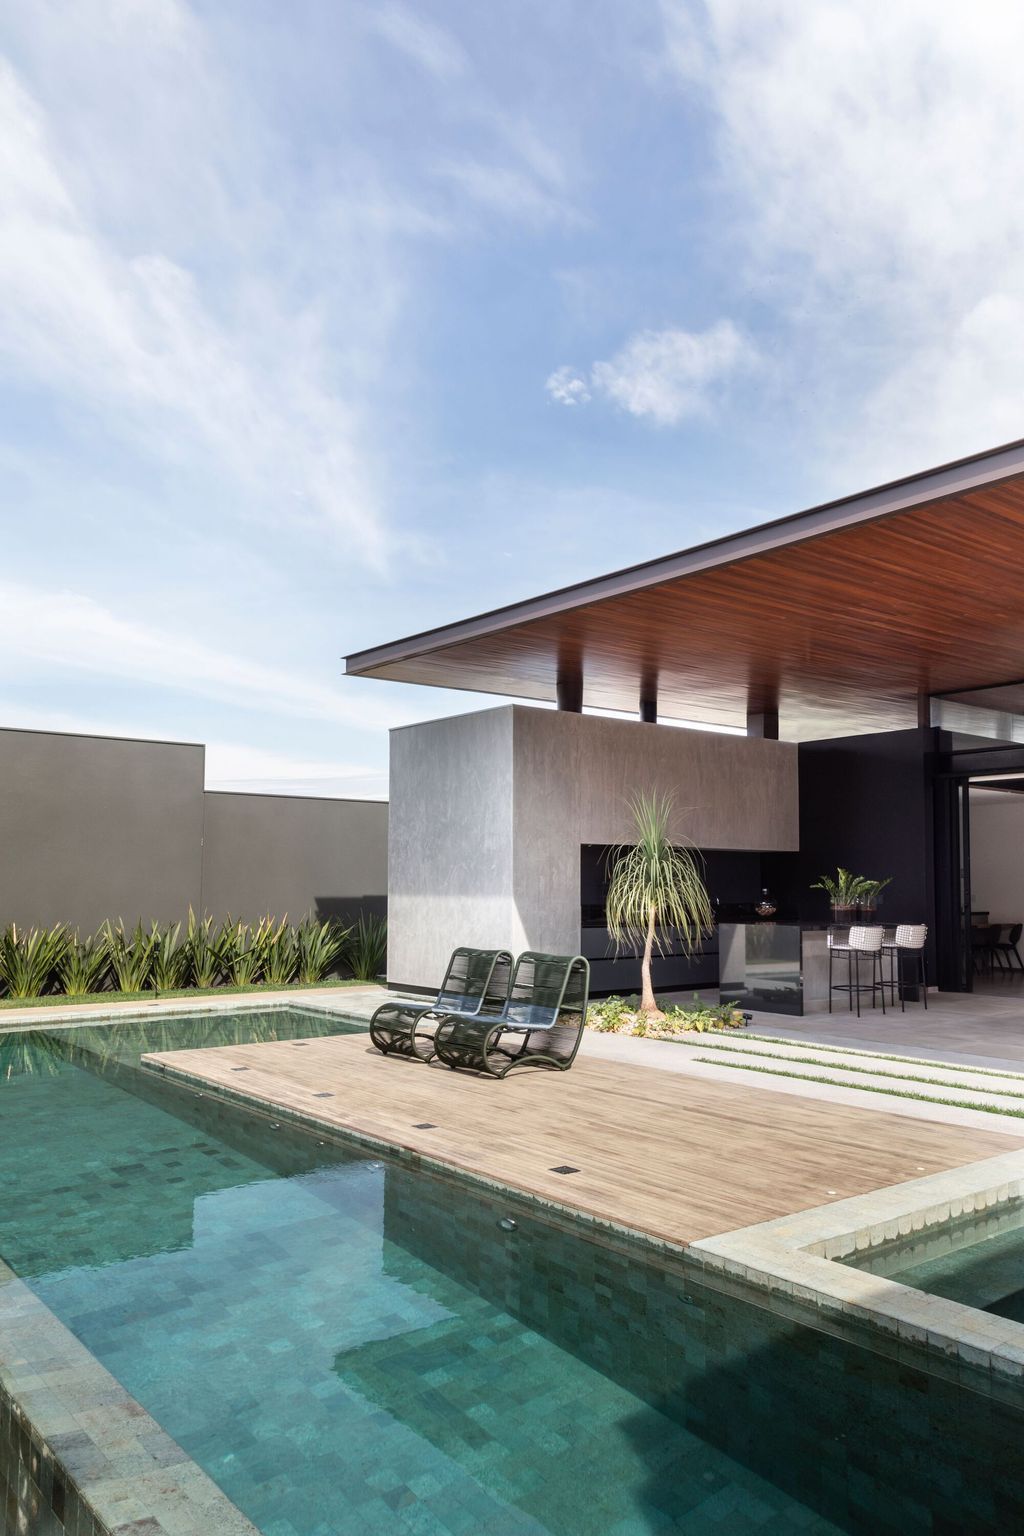 LEMA Residence, Elgegant Project in Brazil by Padovani Arquitetos